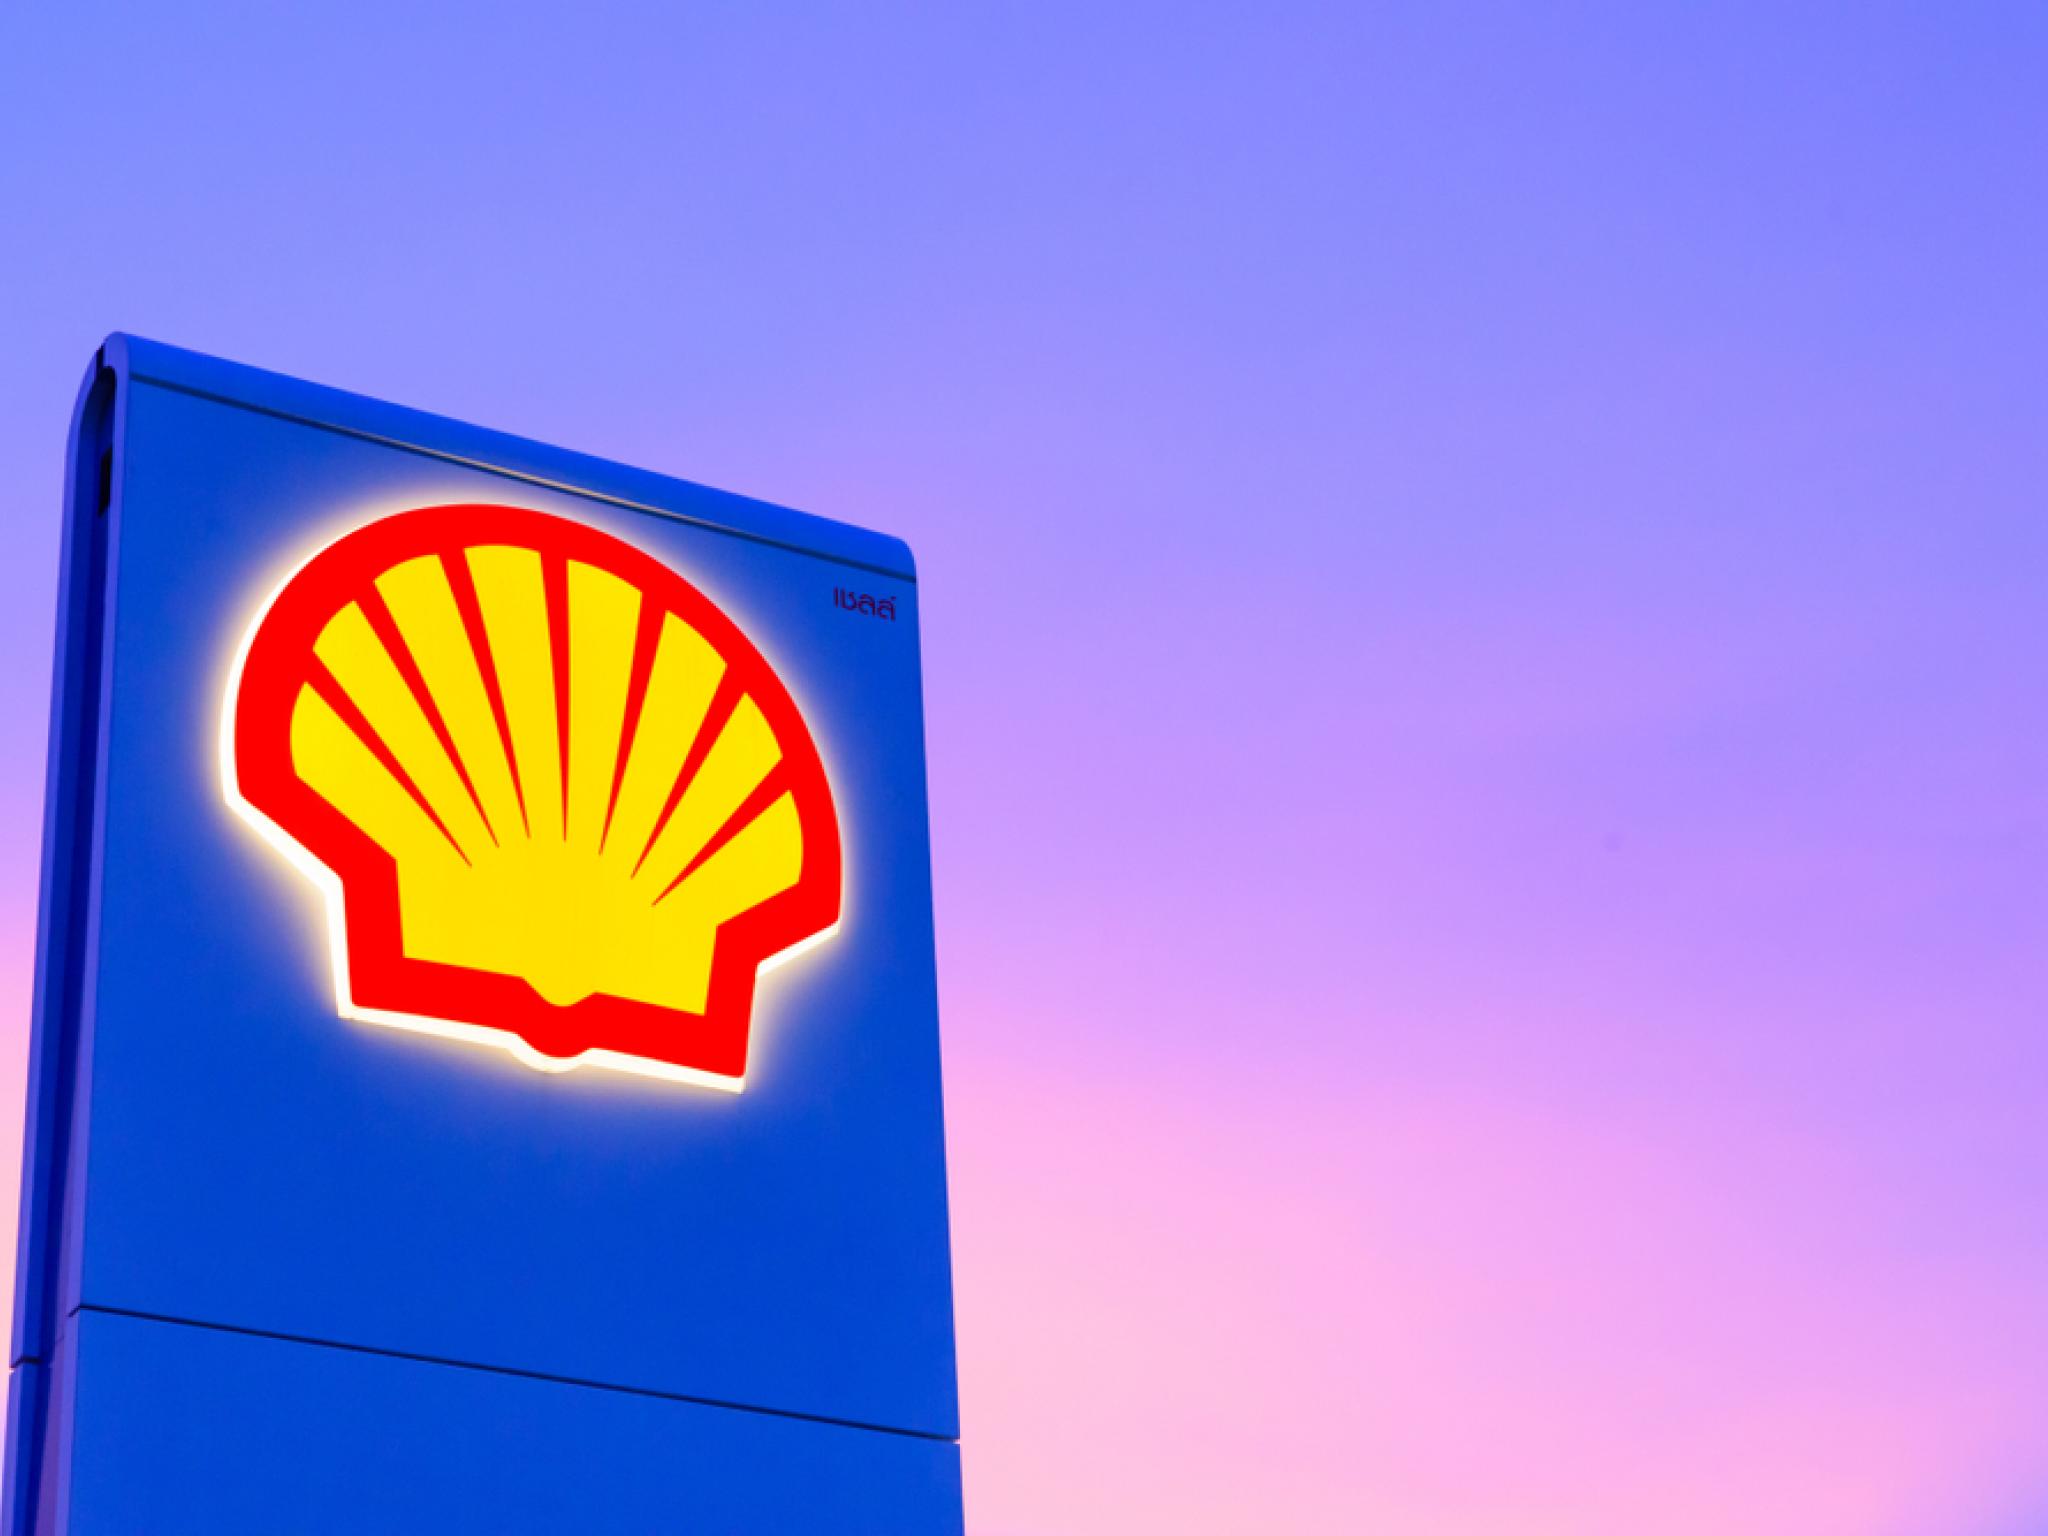  shell-shifts-gears-in-south-africa-reportedly-exits-downstream-unit 